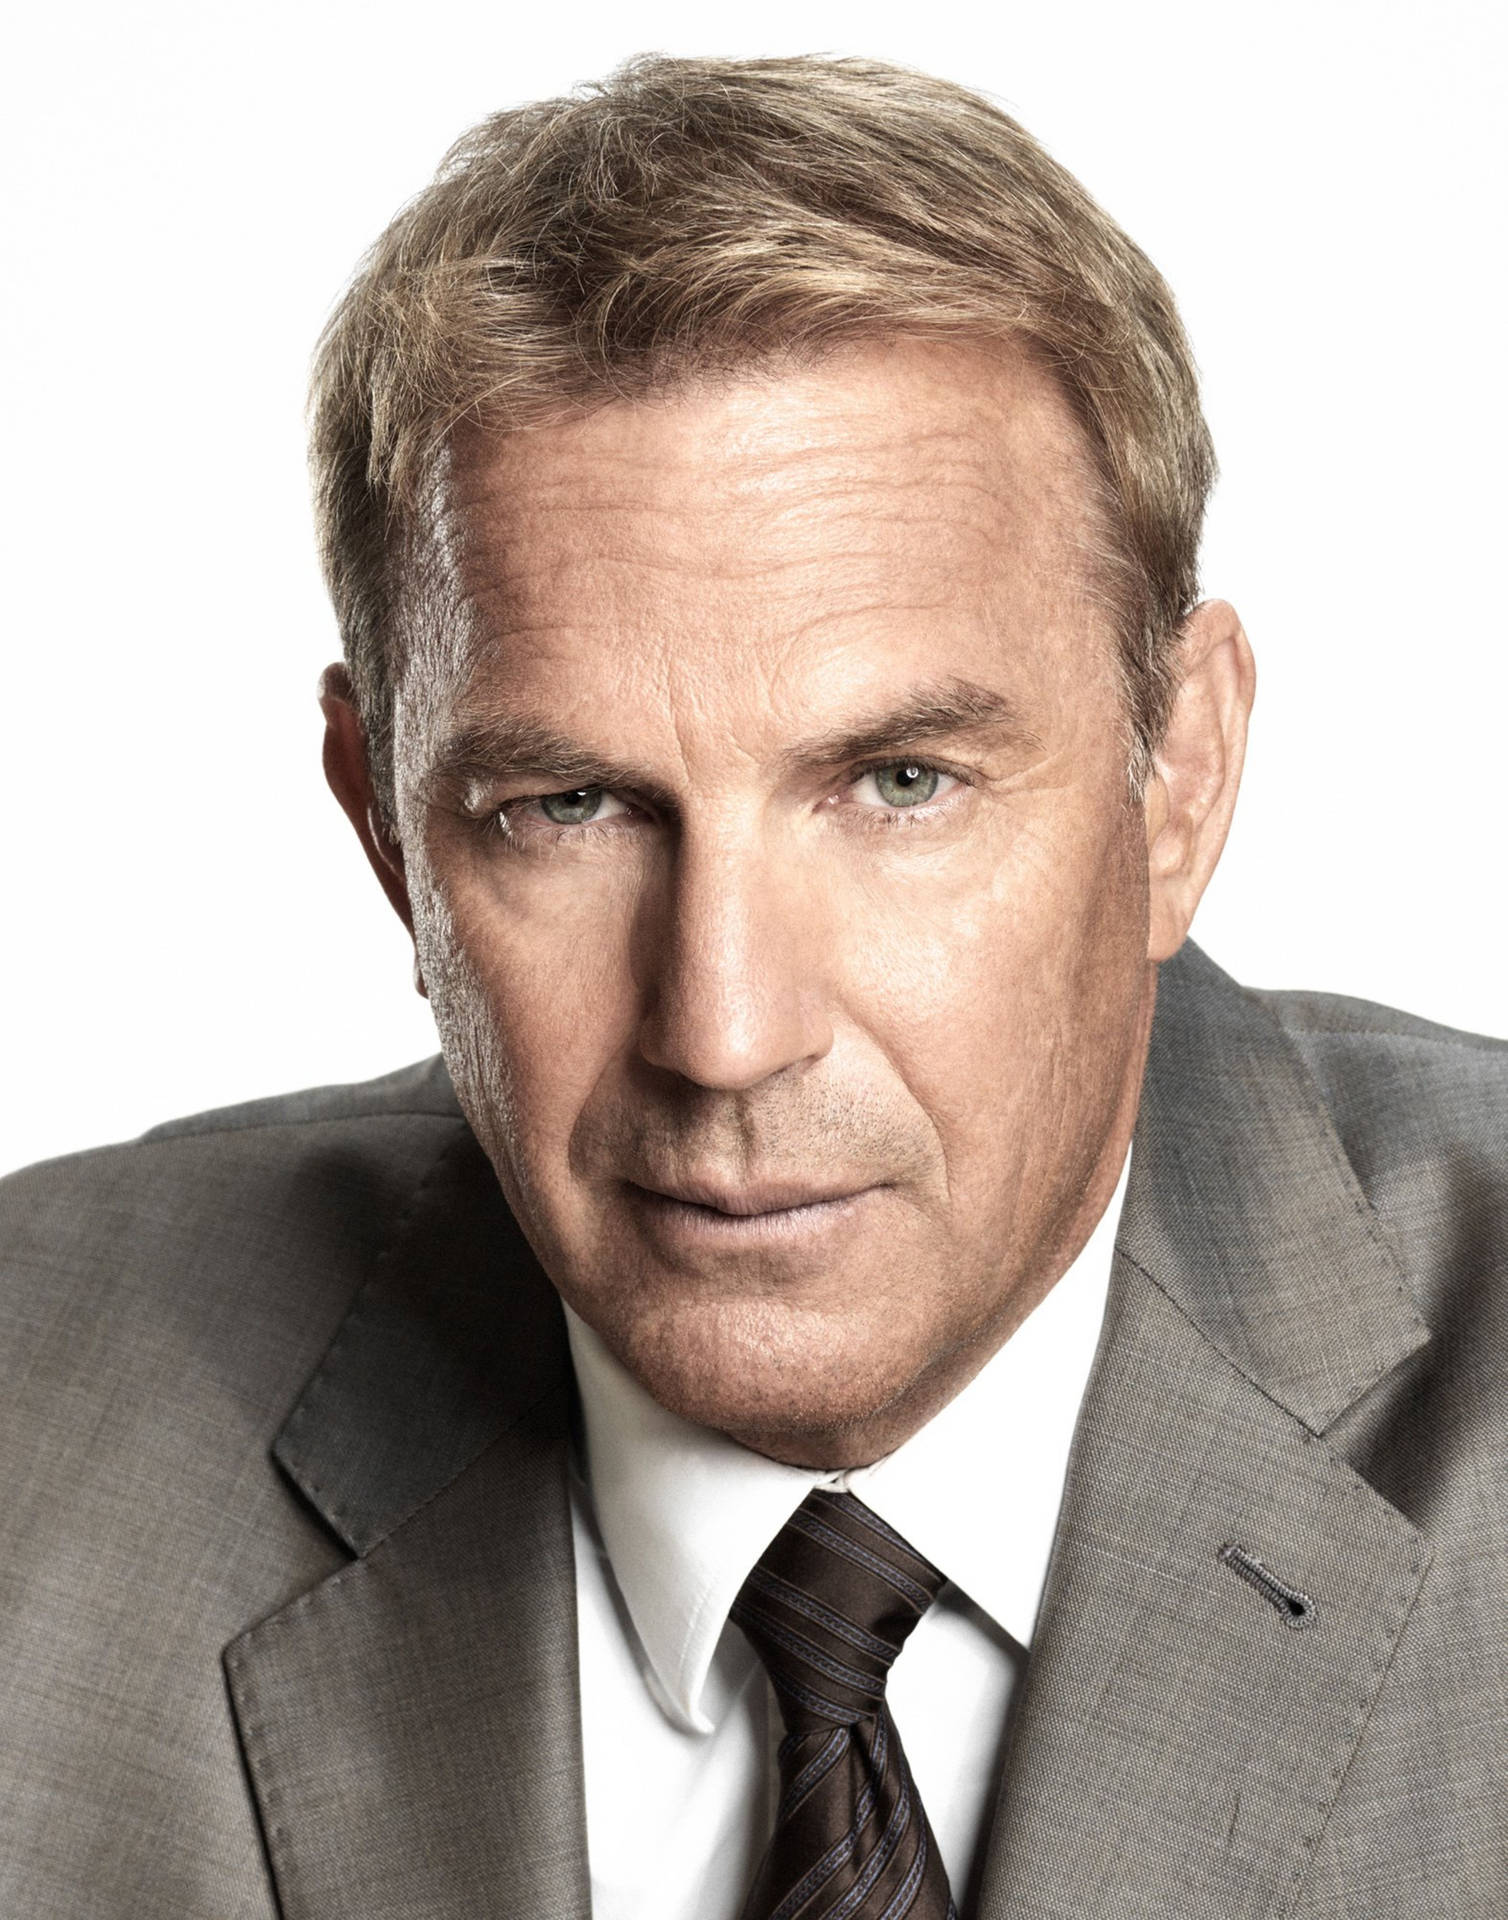 Kevin Costner In Suit And Tie Wallpaper